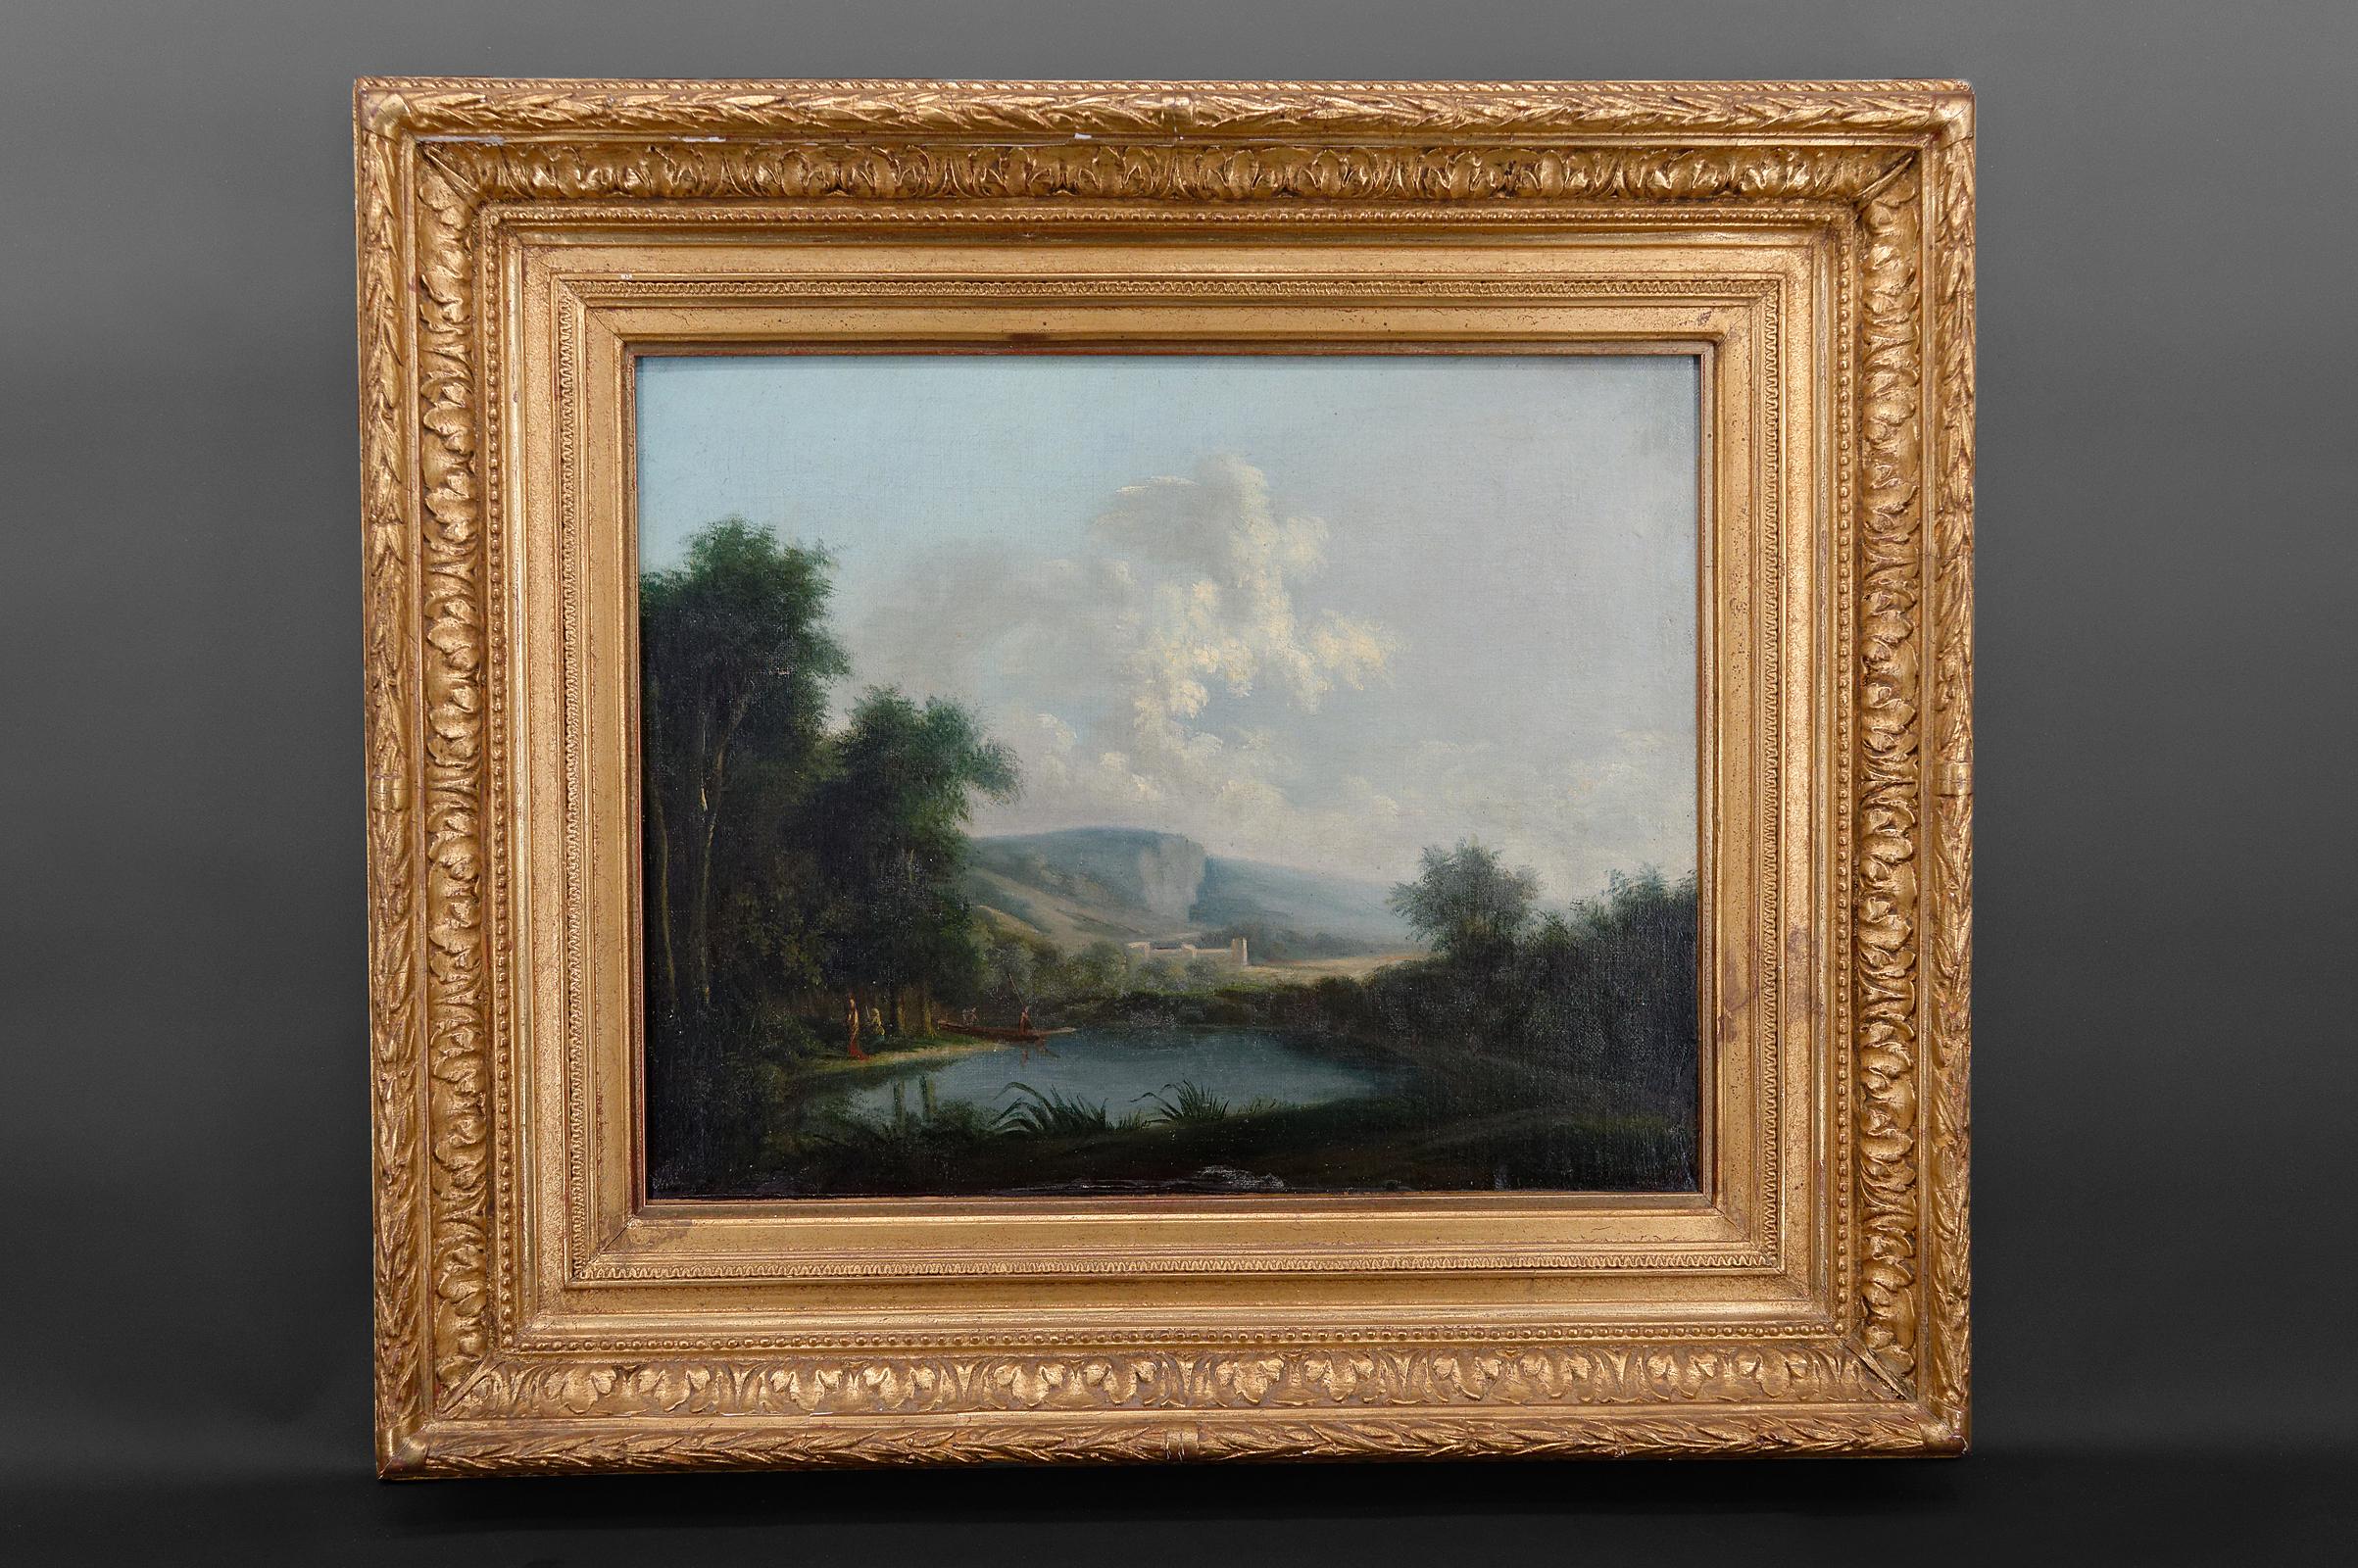 In the foreground, a lake surrounded by vegetation.
On the left bank, several figures, some in a boat.
In the background, a building that resembles a fortified castle, in a hilly landscape

Italy
Early 19th century
Probably bought during a Grand